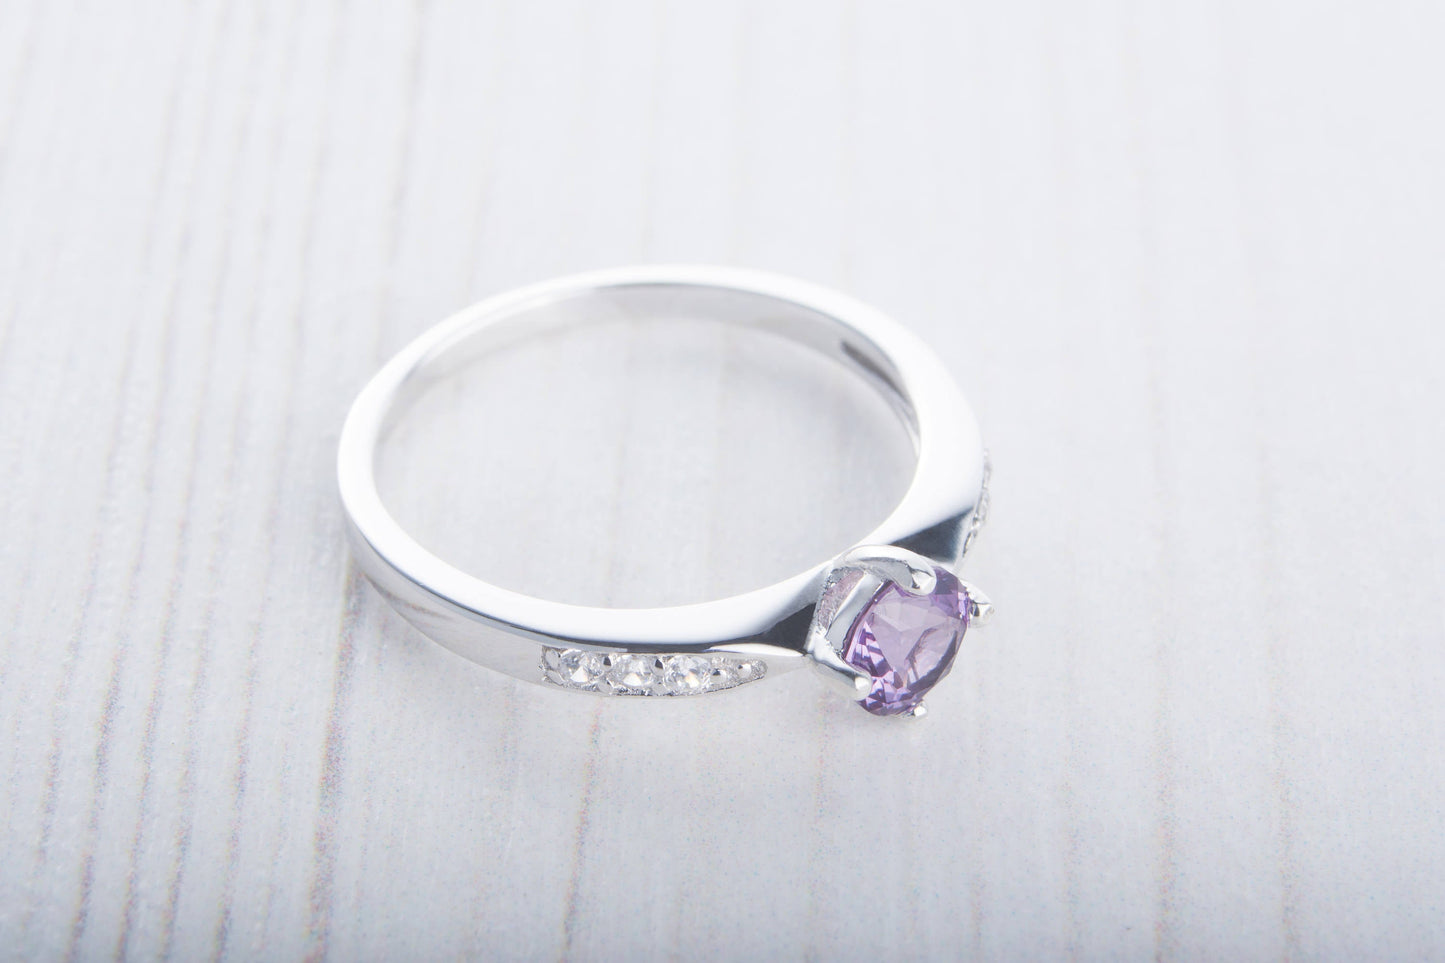 Alexandrite Solitaire engagement ring - available in sterling silver or white gold - handmade engagement ring - wedding ring